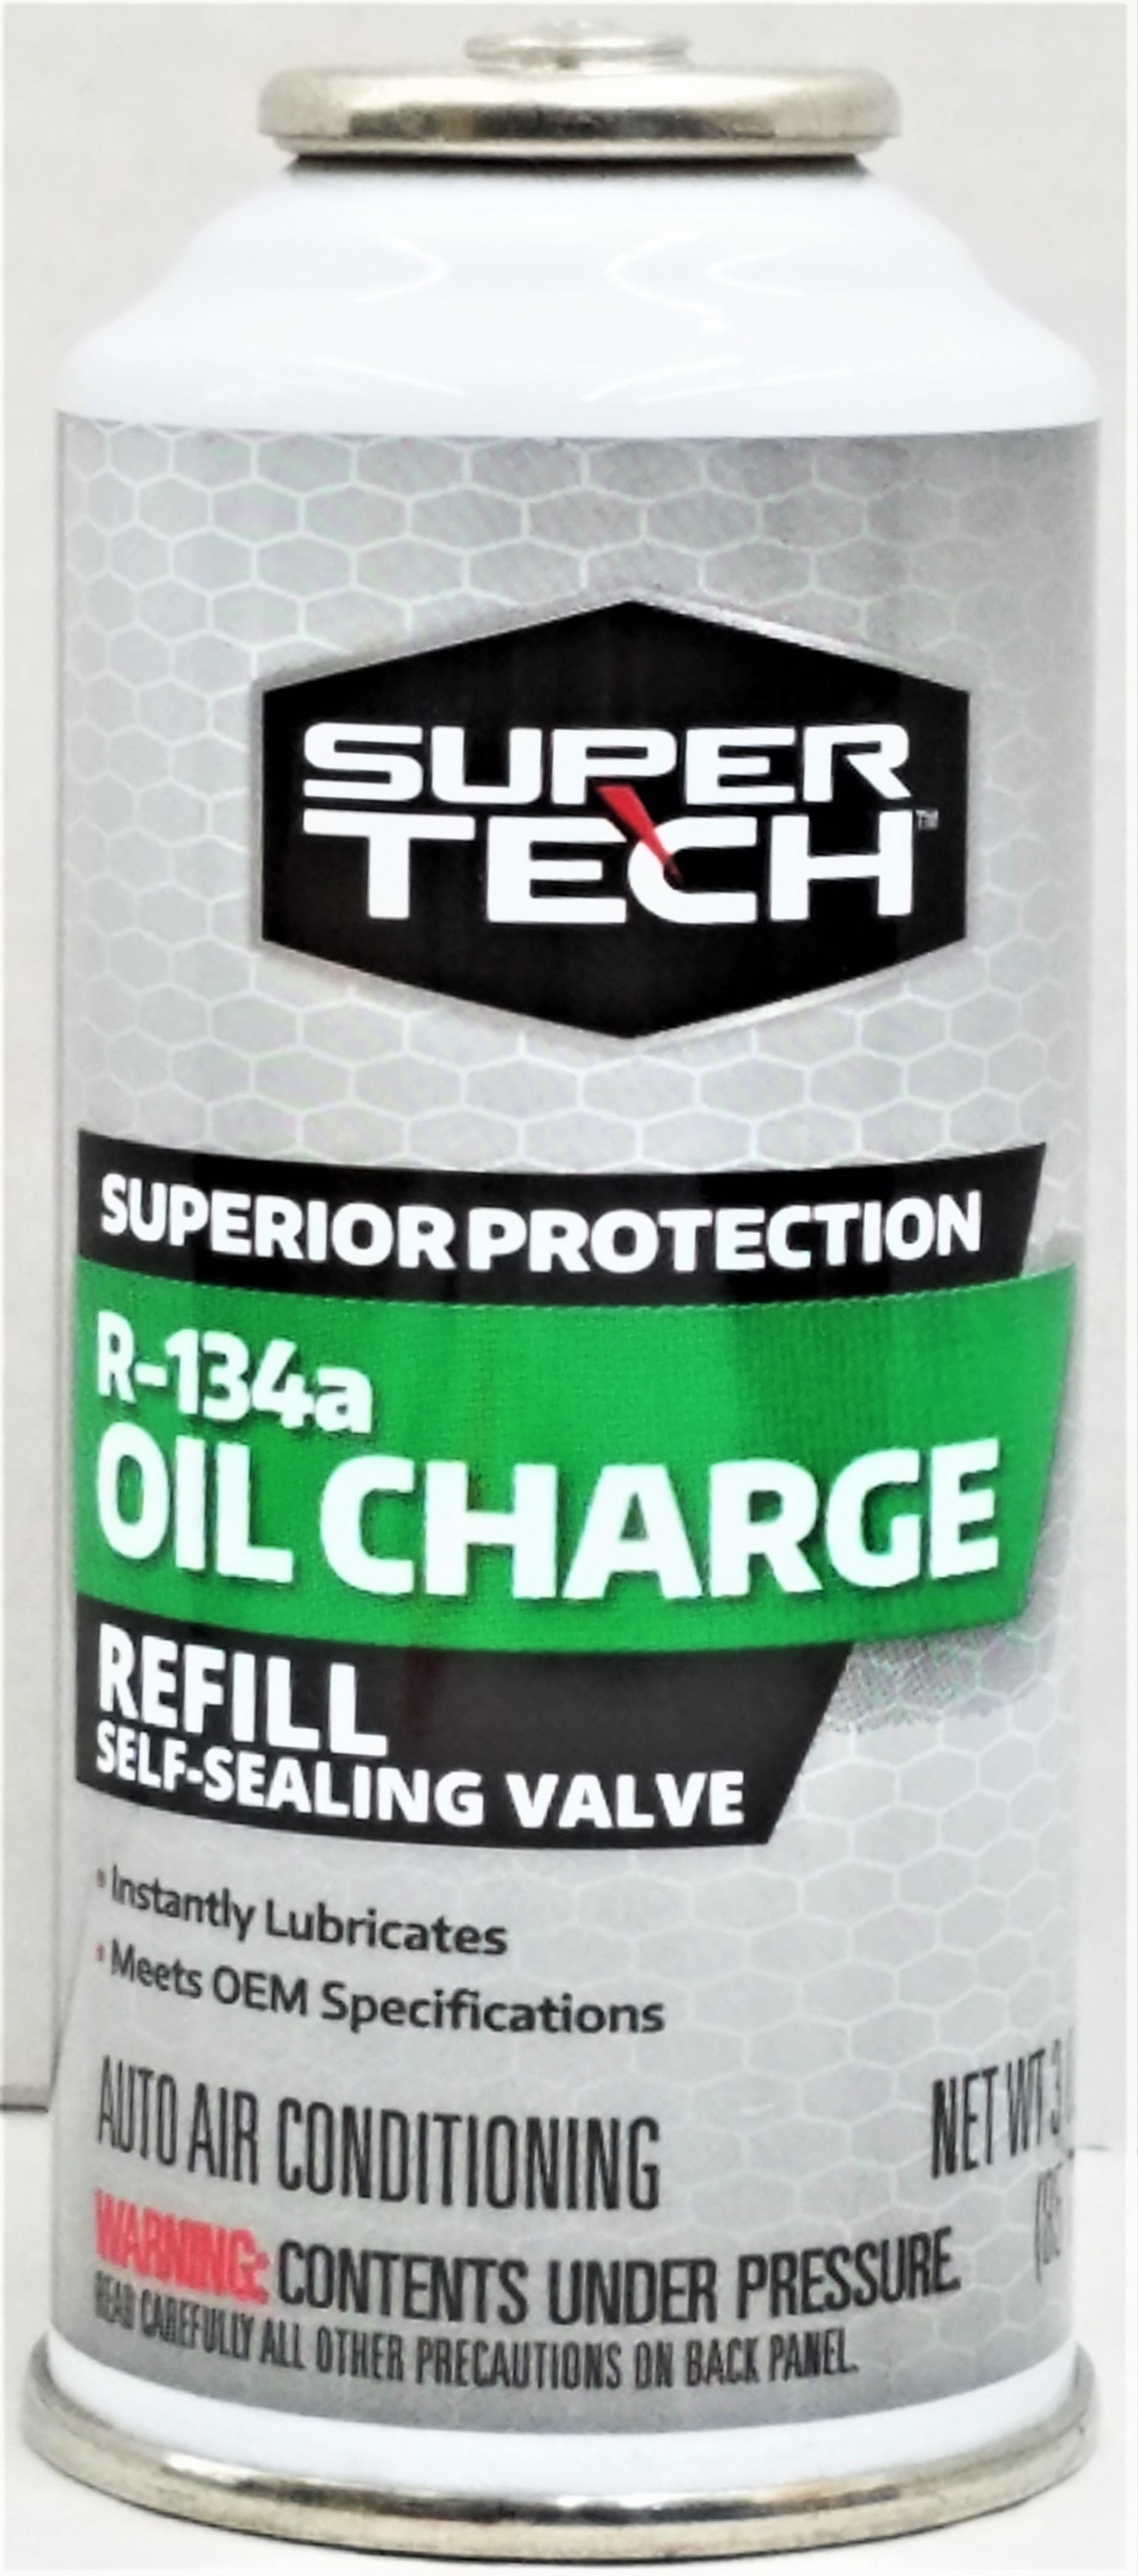 Buy Super Tech R 134a Pag Oil Charge Refrigerant 3 Oz Online At Lowest